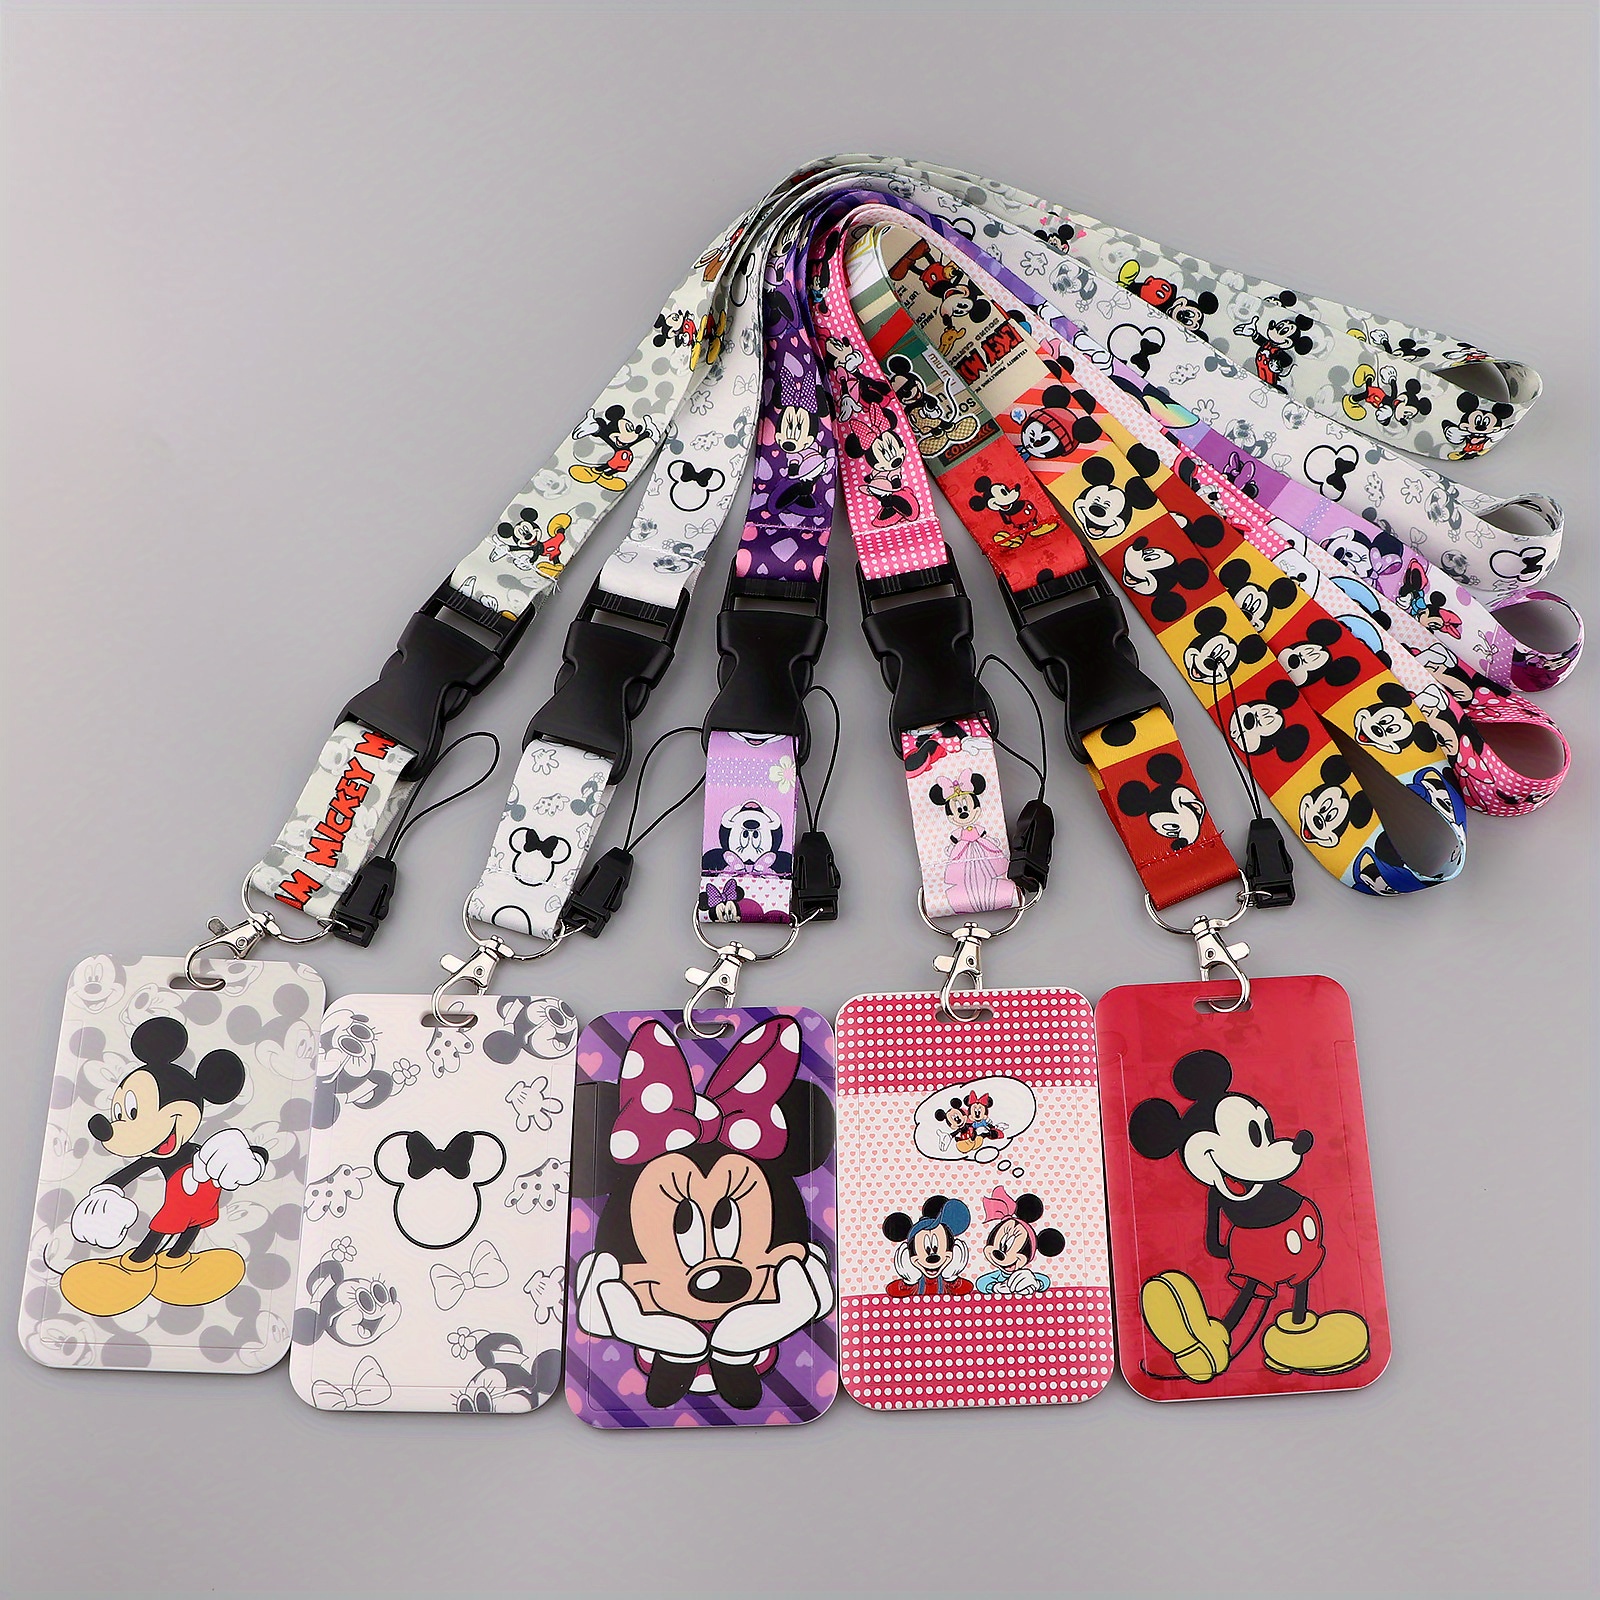 

Disney Mickey Mouse Cartoon Id Badge Holder With Lanyard - Durable Plastic, Ume Brand - Perfect For Bus Passes, Access Cards & Usb Drives